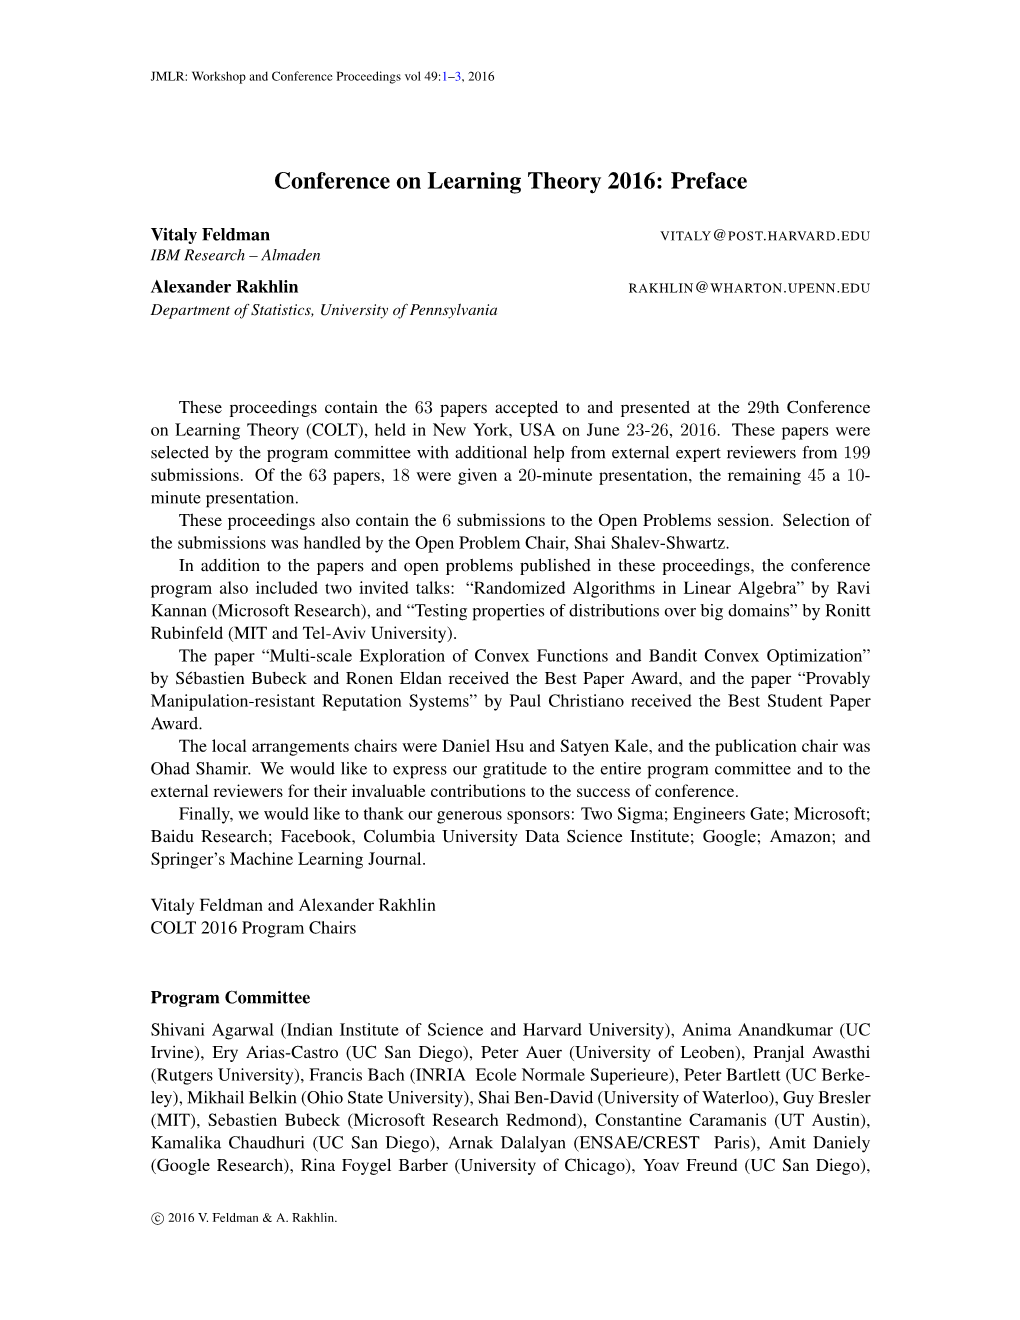 Conference on Learning Theory 2016: Preface